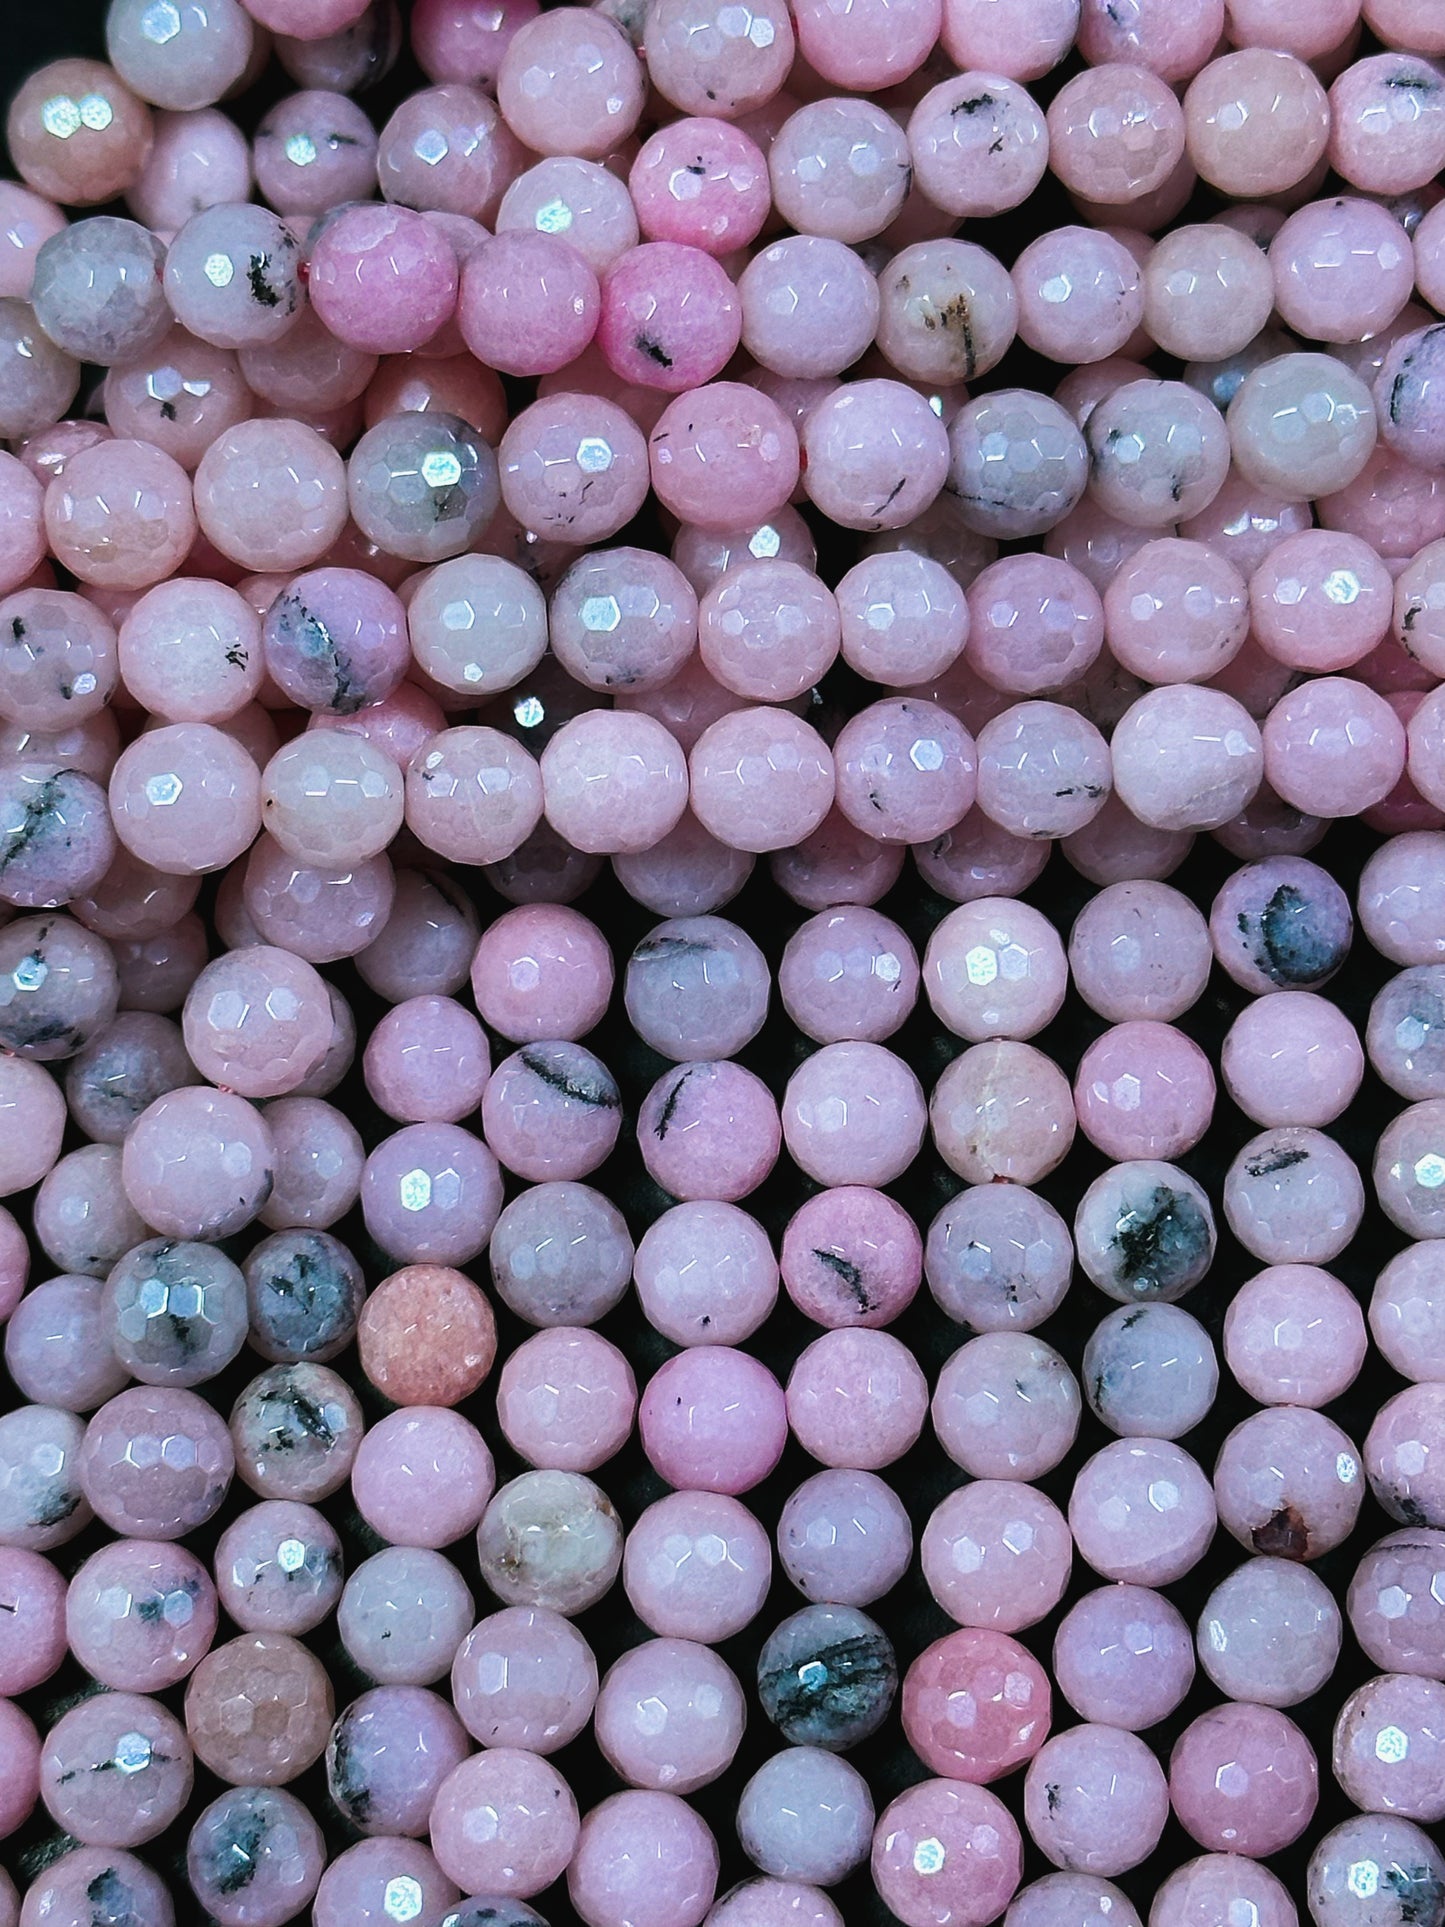 Mystic Natural Pink Opal Gemstone Bead Faceted 8mm Round Beads, Beautiful Pink Color Pink Opal Gemstone Bead Great Quality, 15.5" Strand